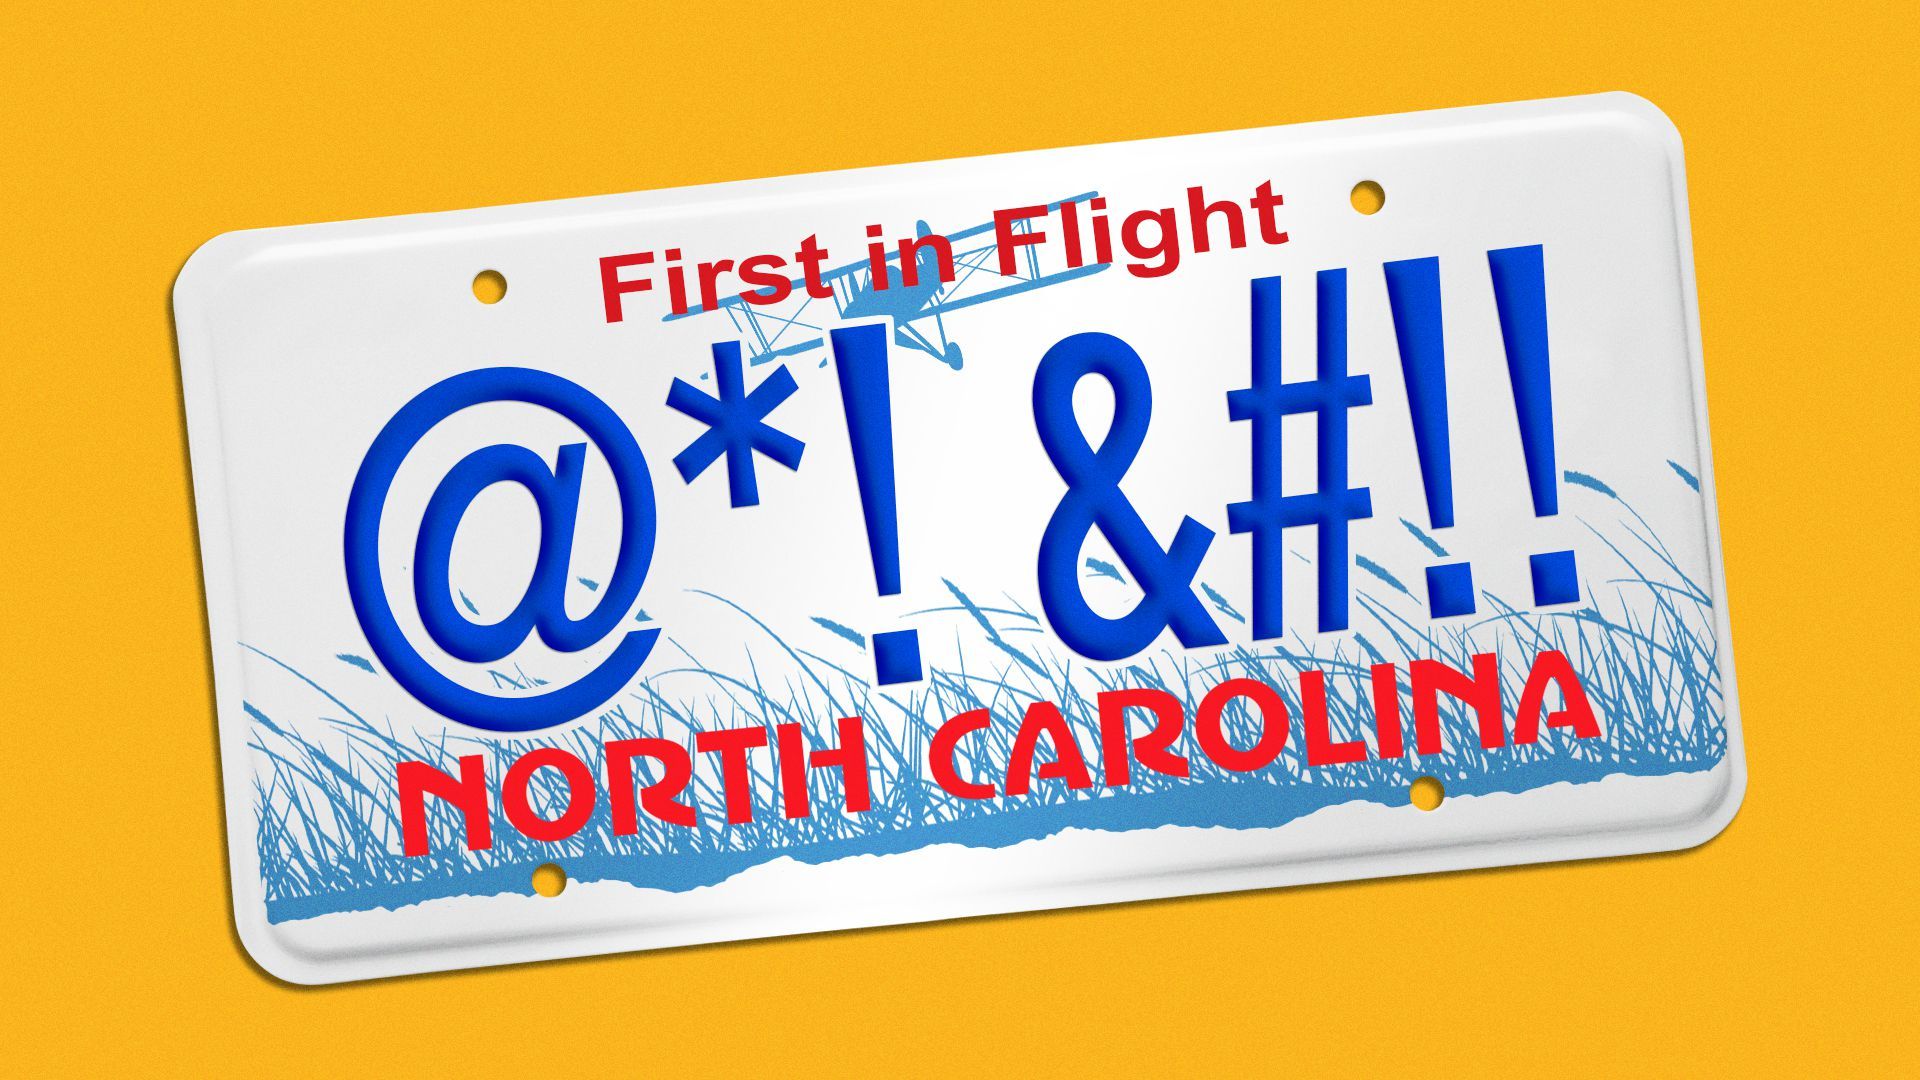 Illustration of North Carolina license plate with symbols implying a swear word.